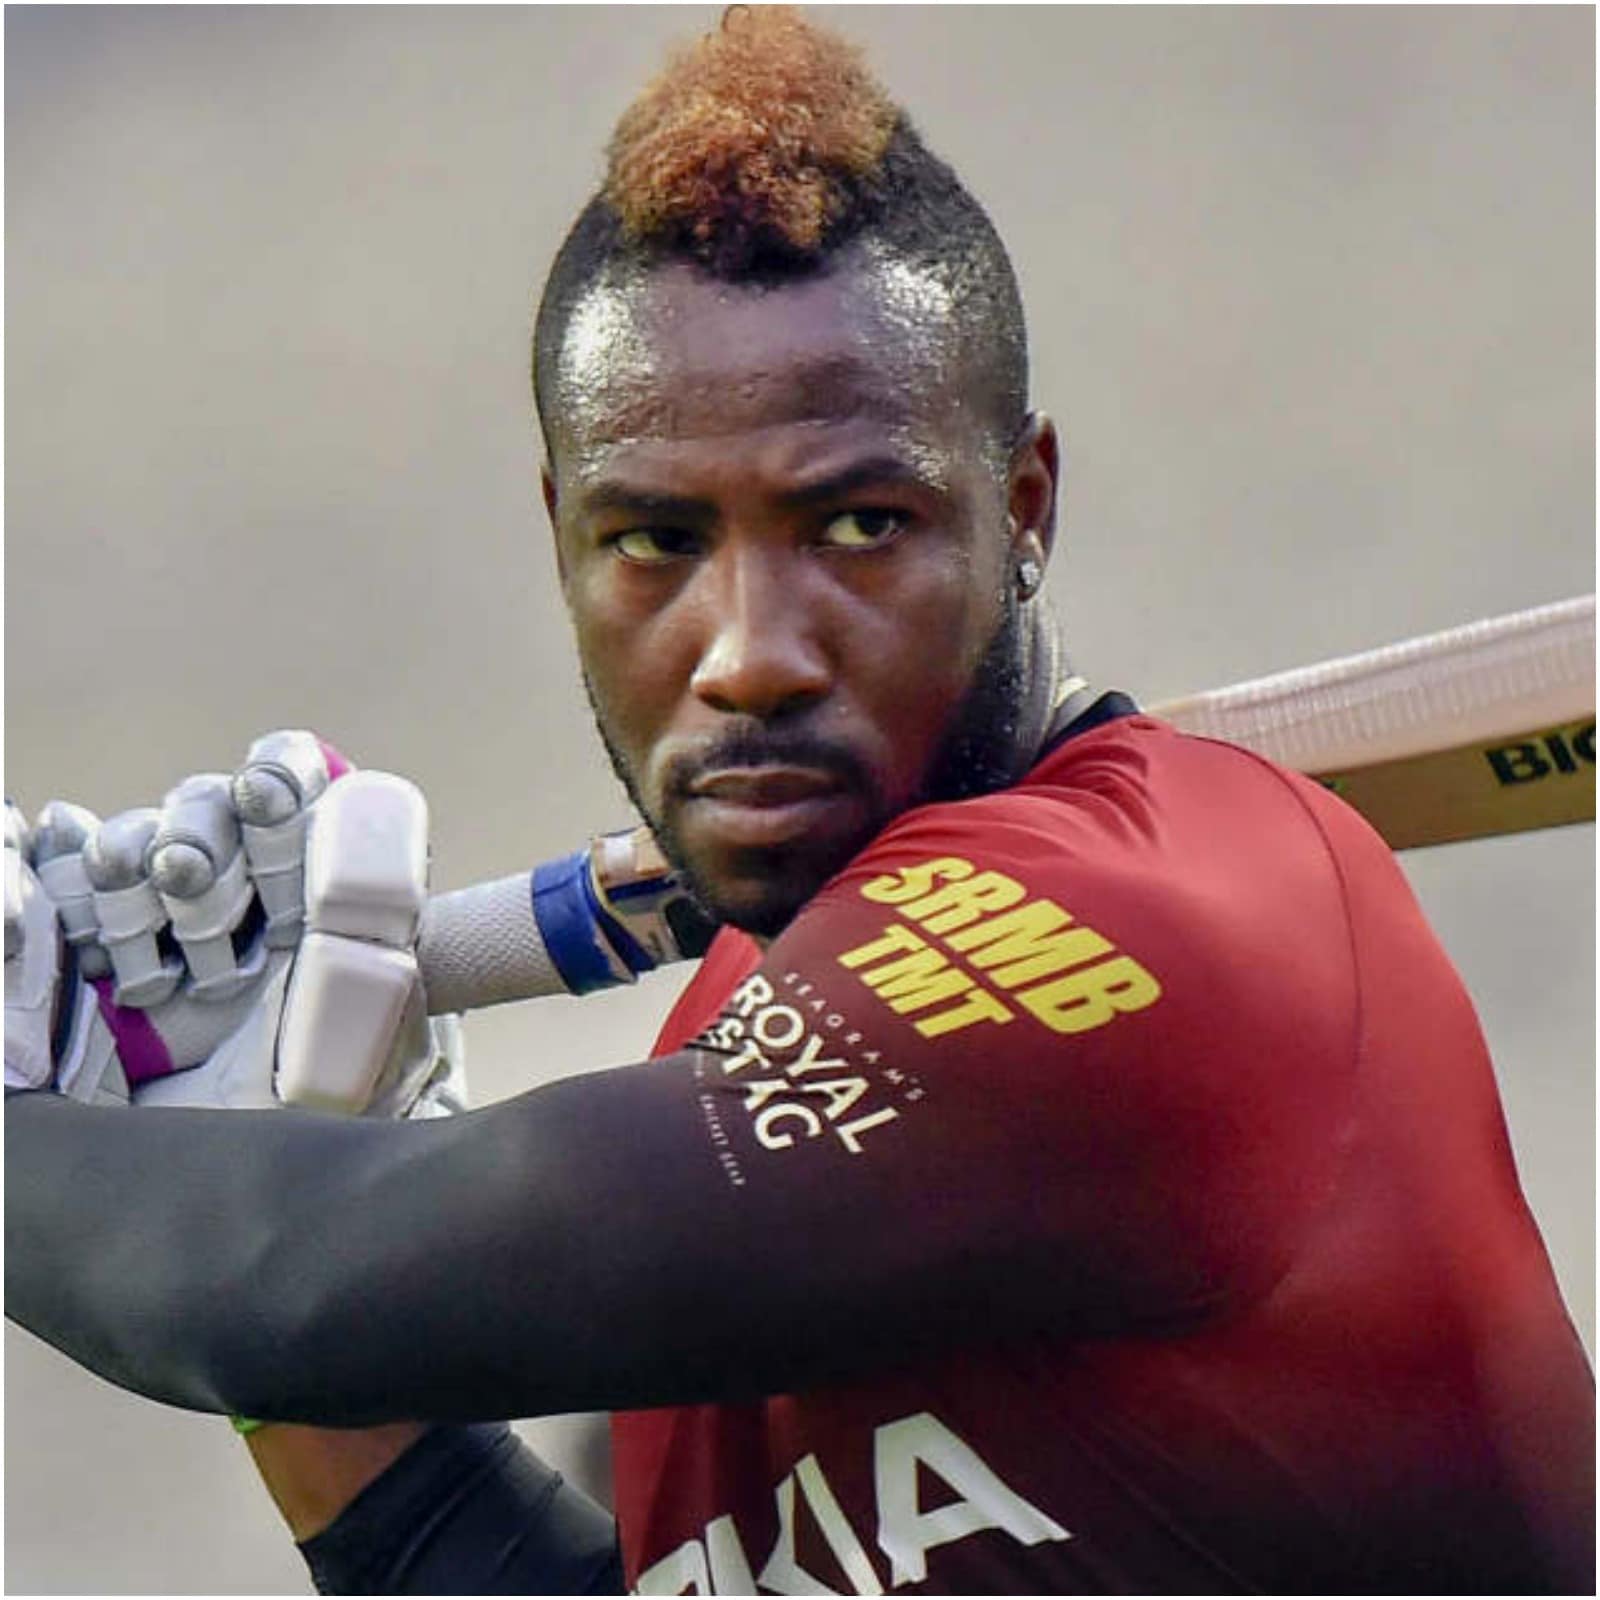 25 Extraordinary Facts About Chris Gayle - Facts.net